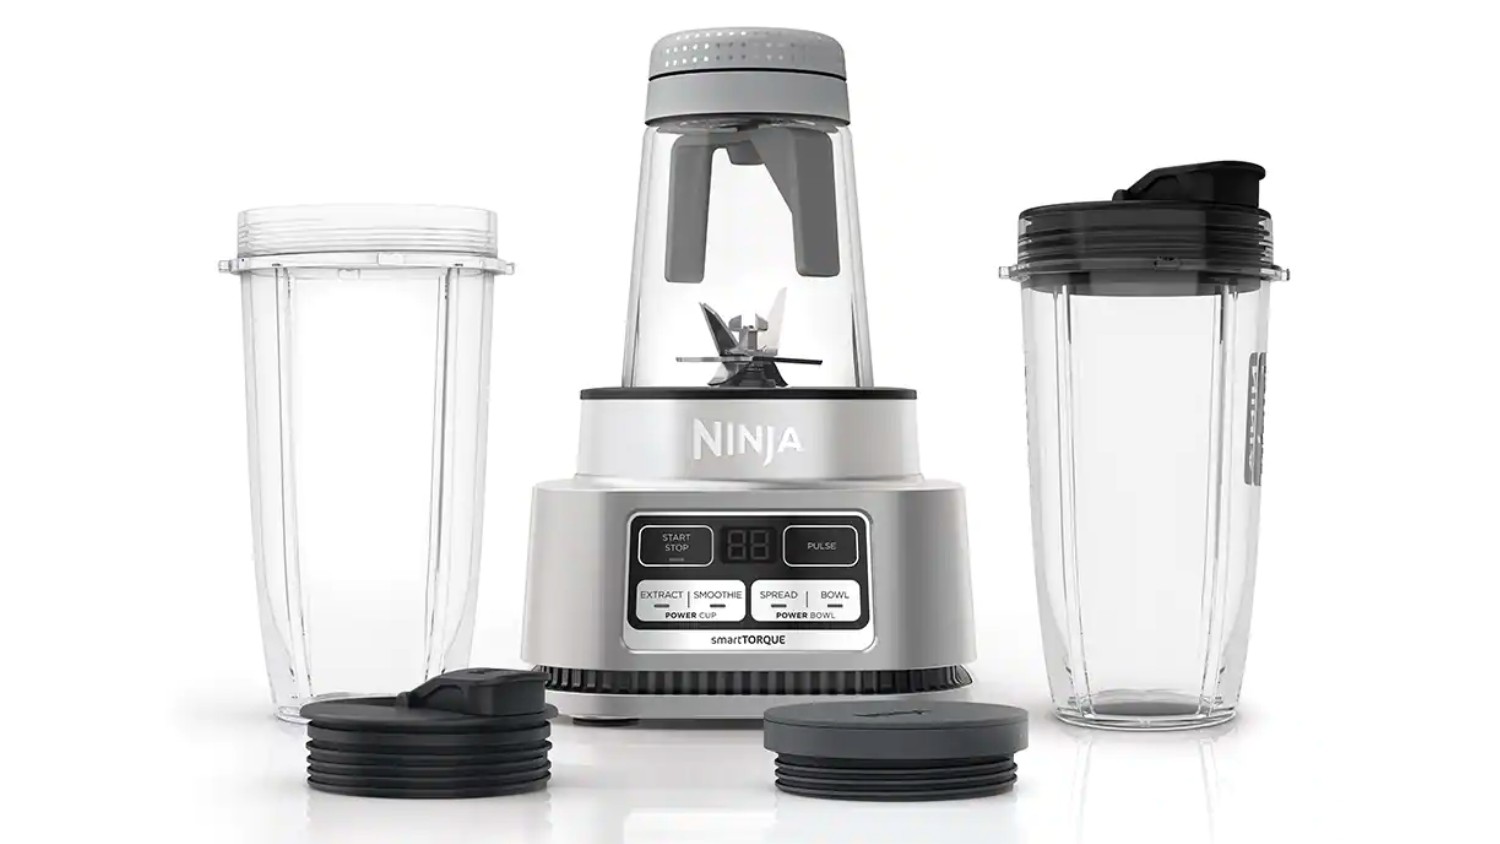 How To Make A Smoothie In A Ninja Blender